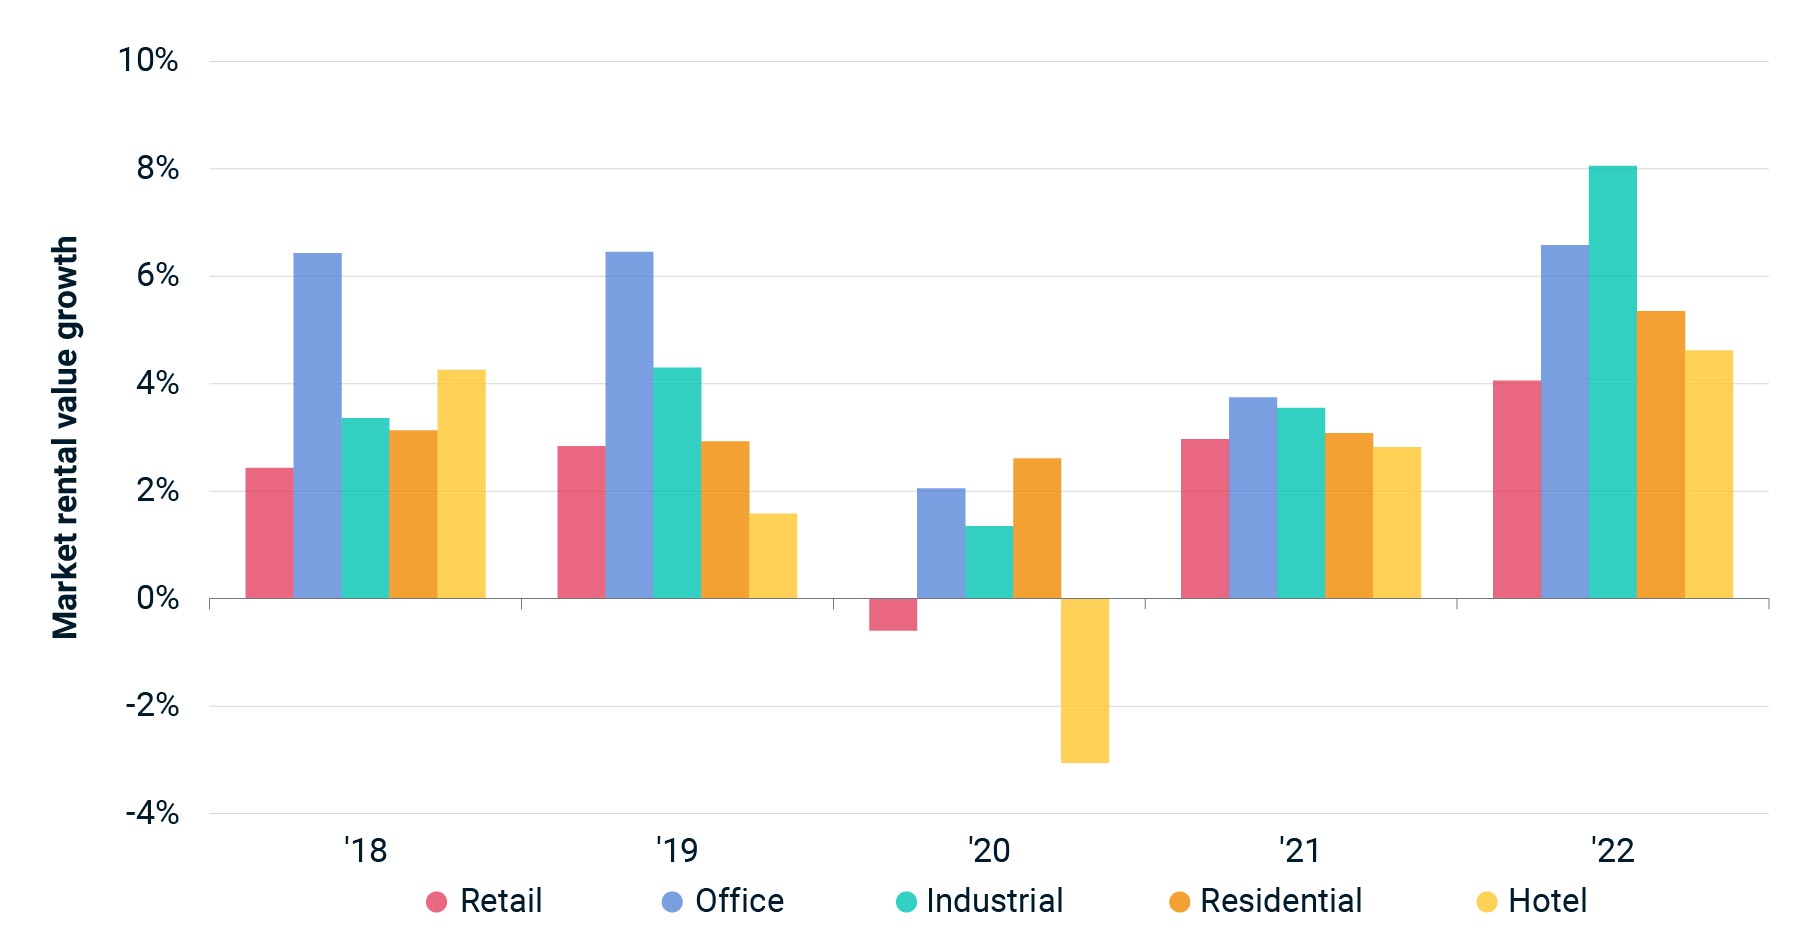 This column chart shows the annual rental value growth 2018 to 2022 for retail, office, industrial, residential and hotel.